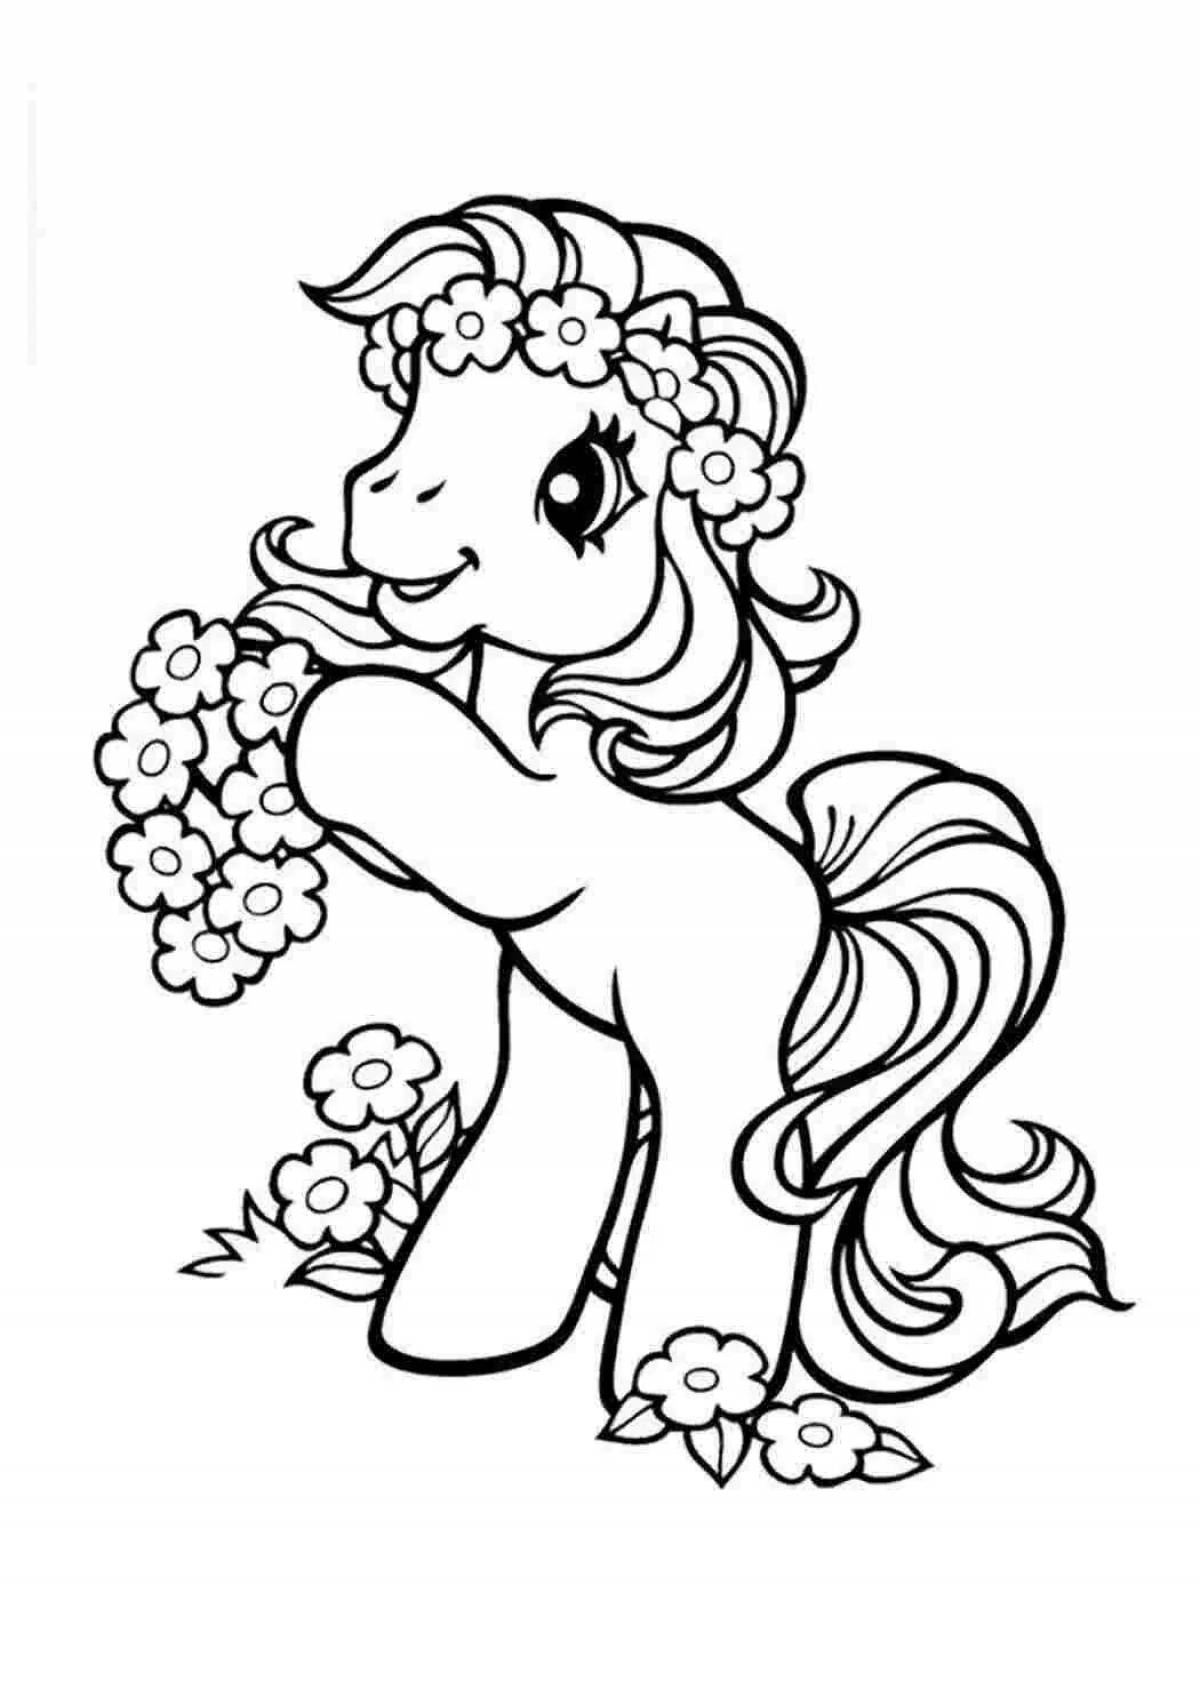 Fancy horse coloring book for 4-5 year olds